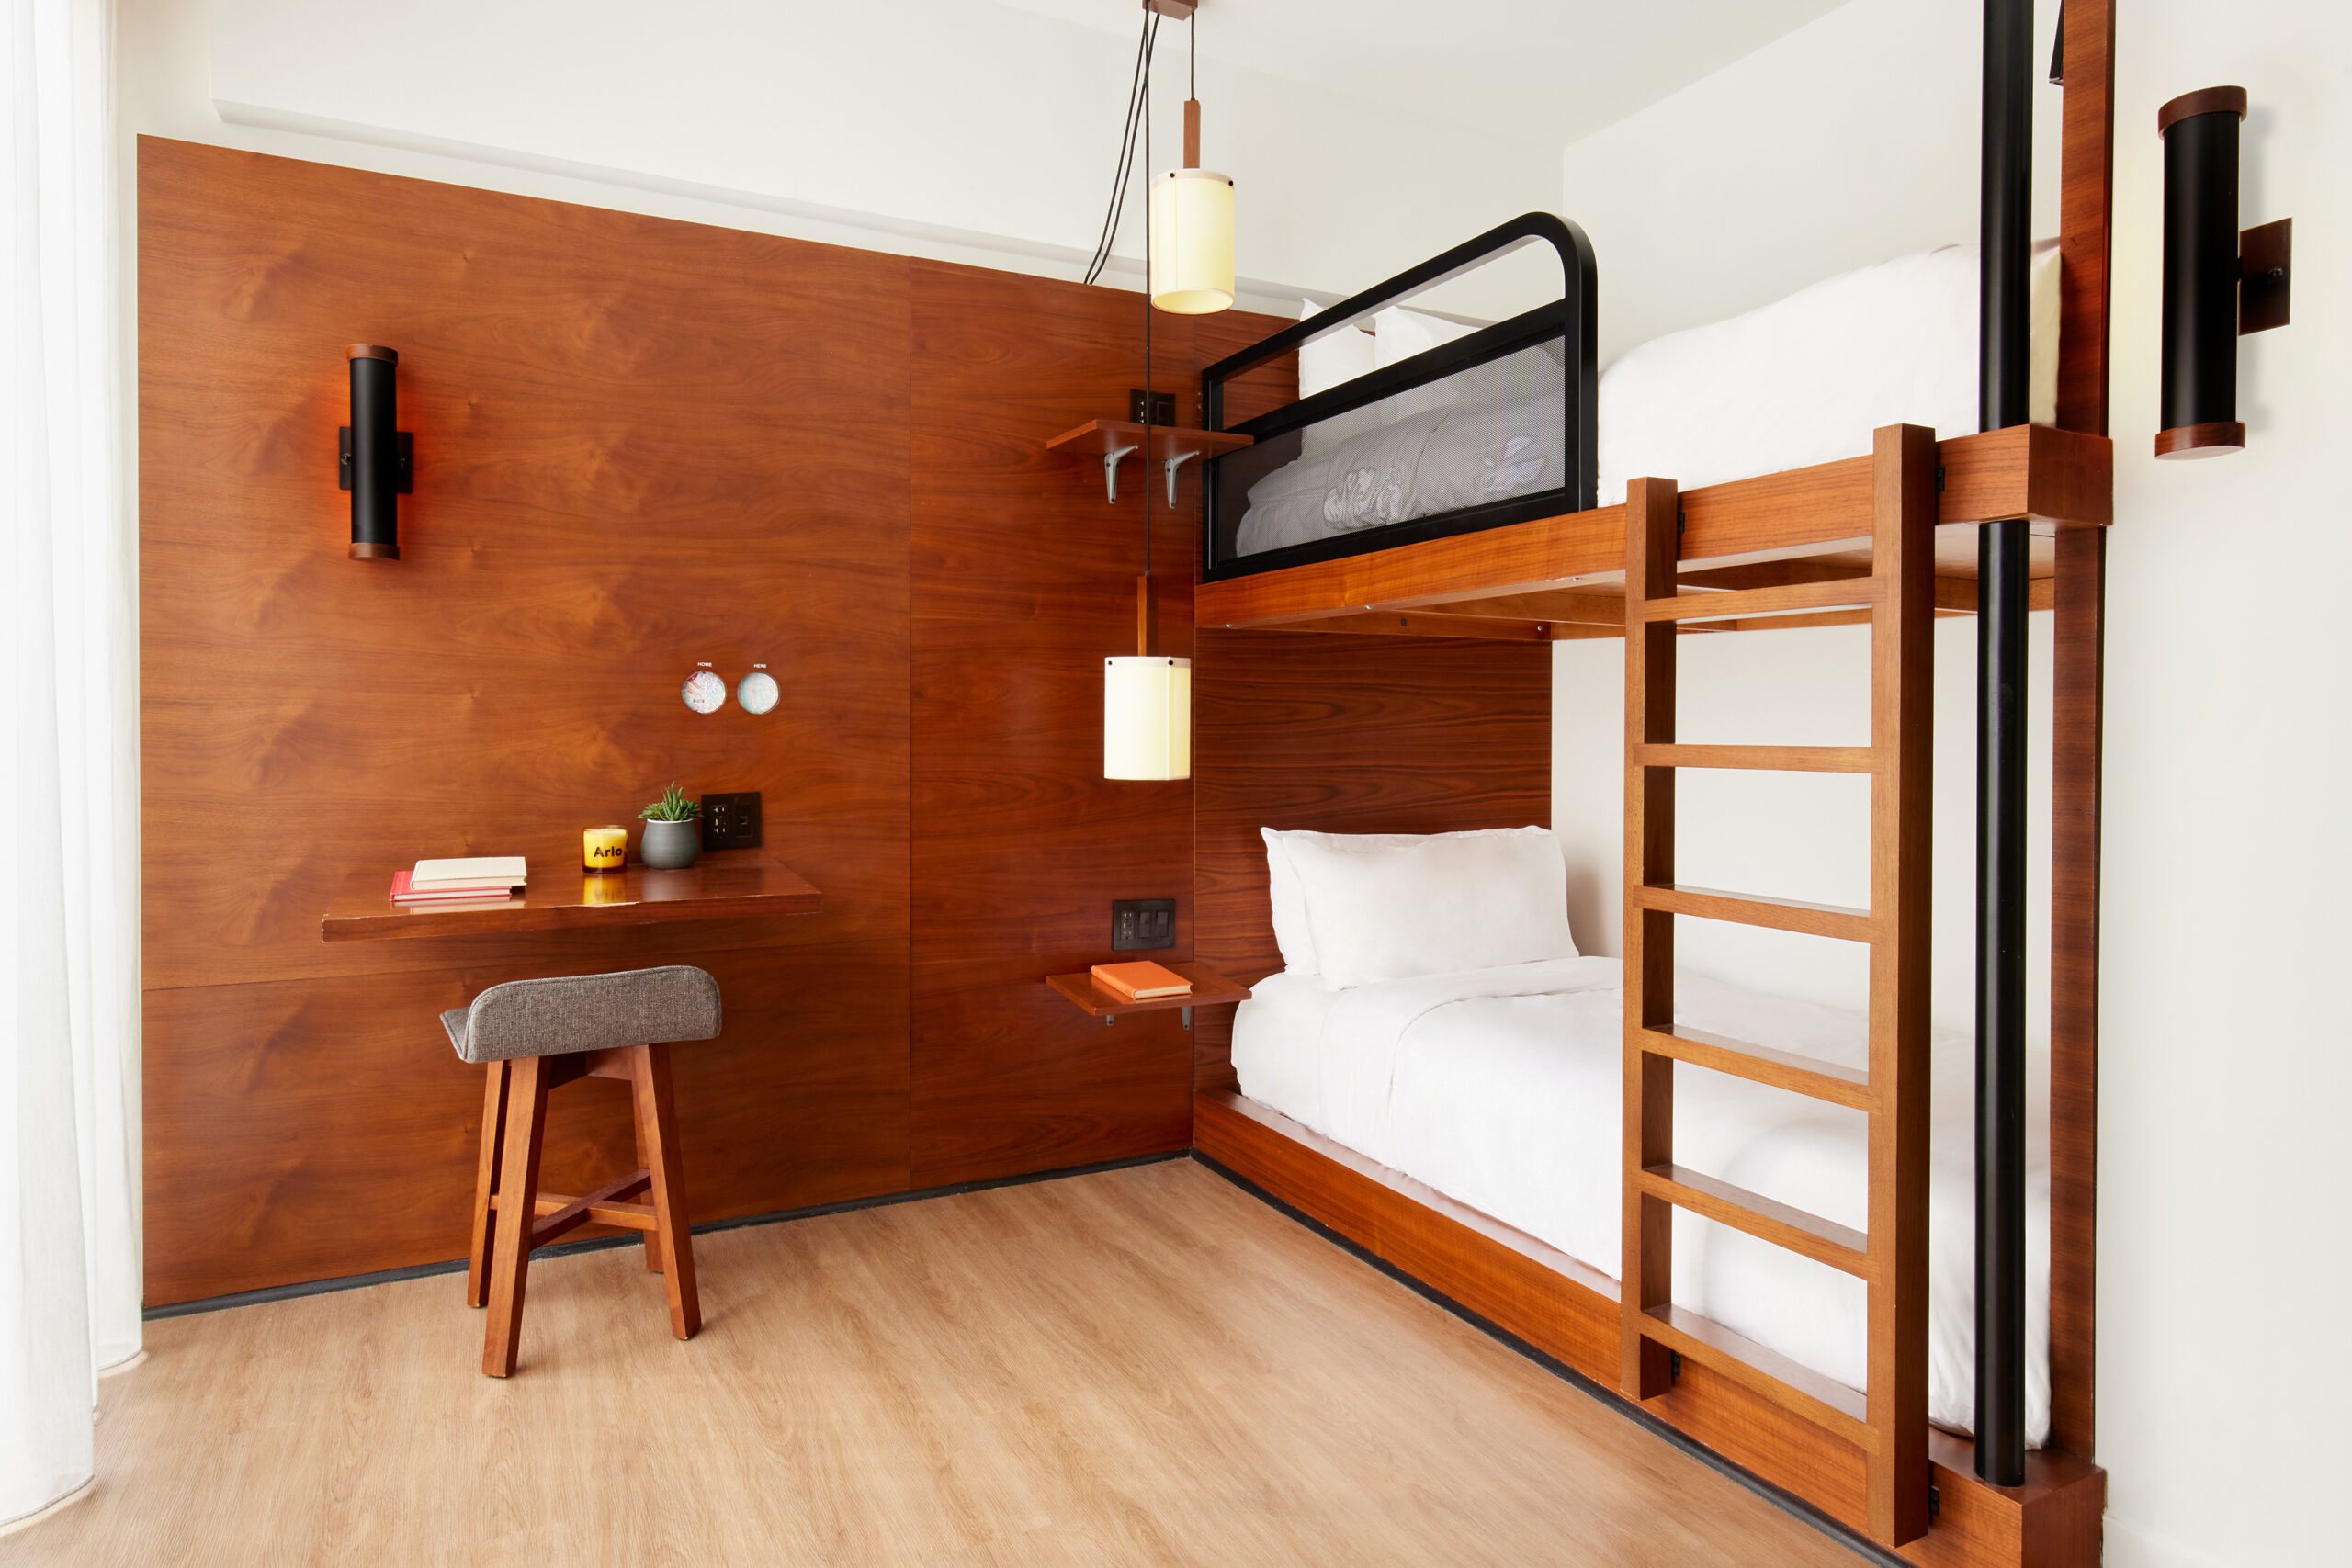 Arlo NoMad Twin Bunk hotel room beds and writing desk